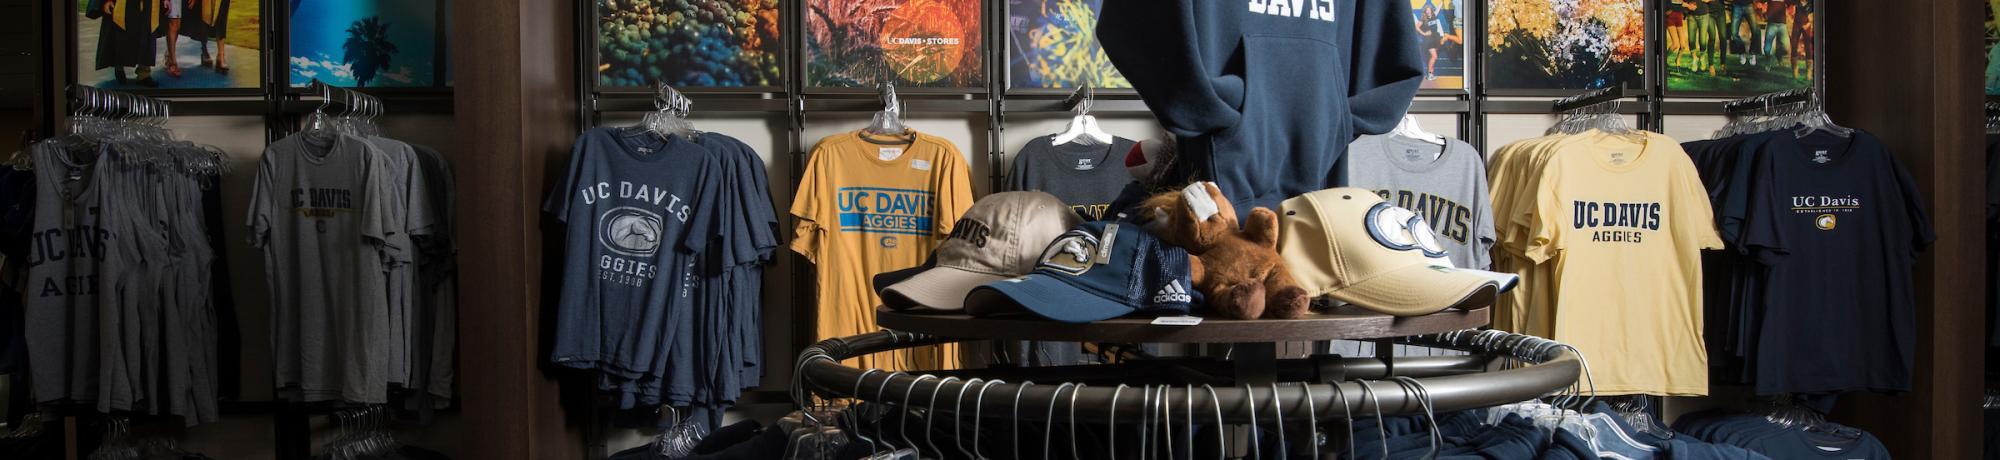 Interior of the UC Davis bookstore with branded hats and shirts visible